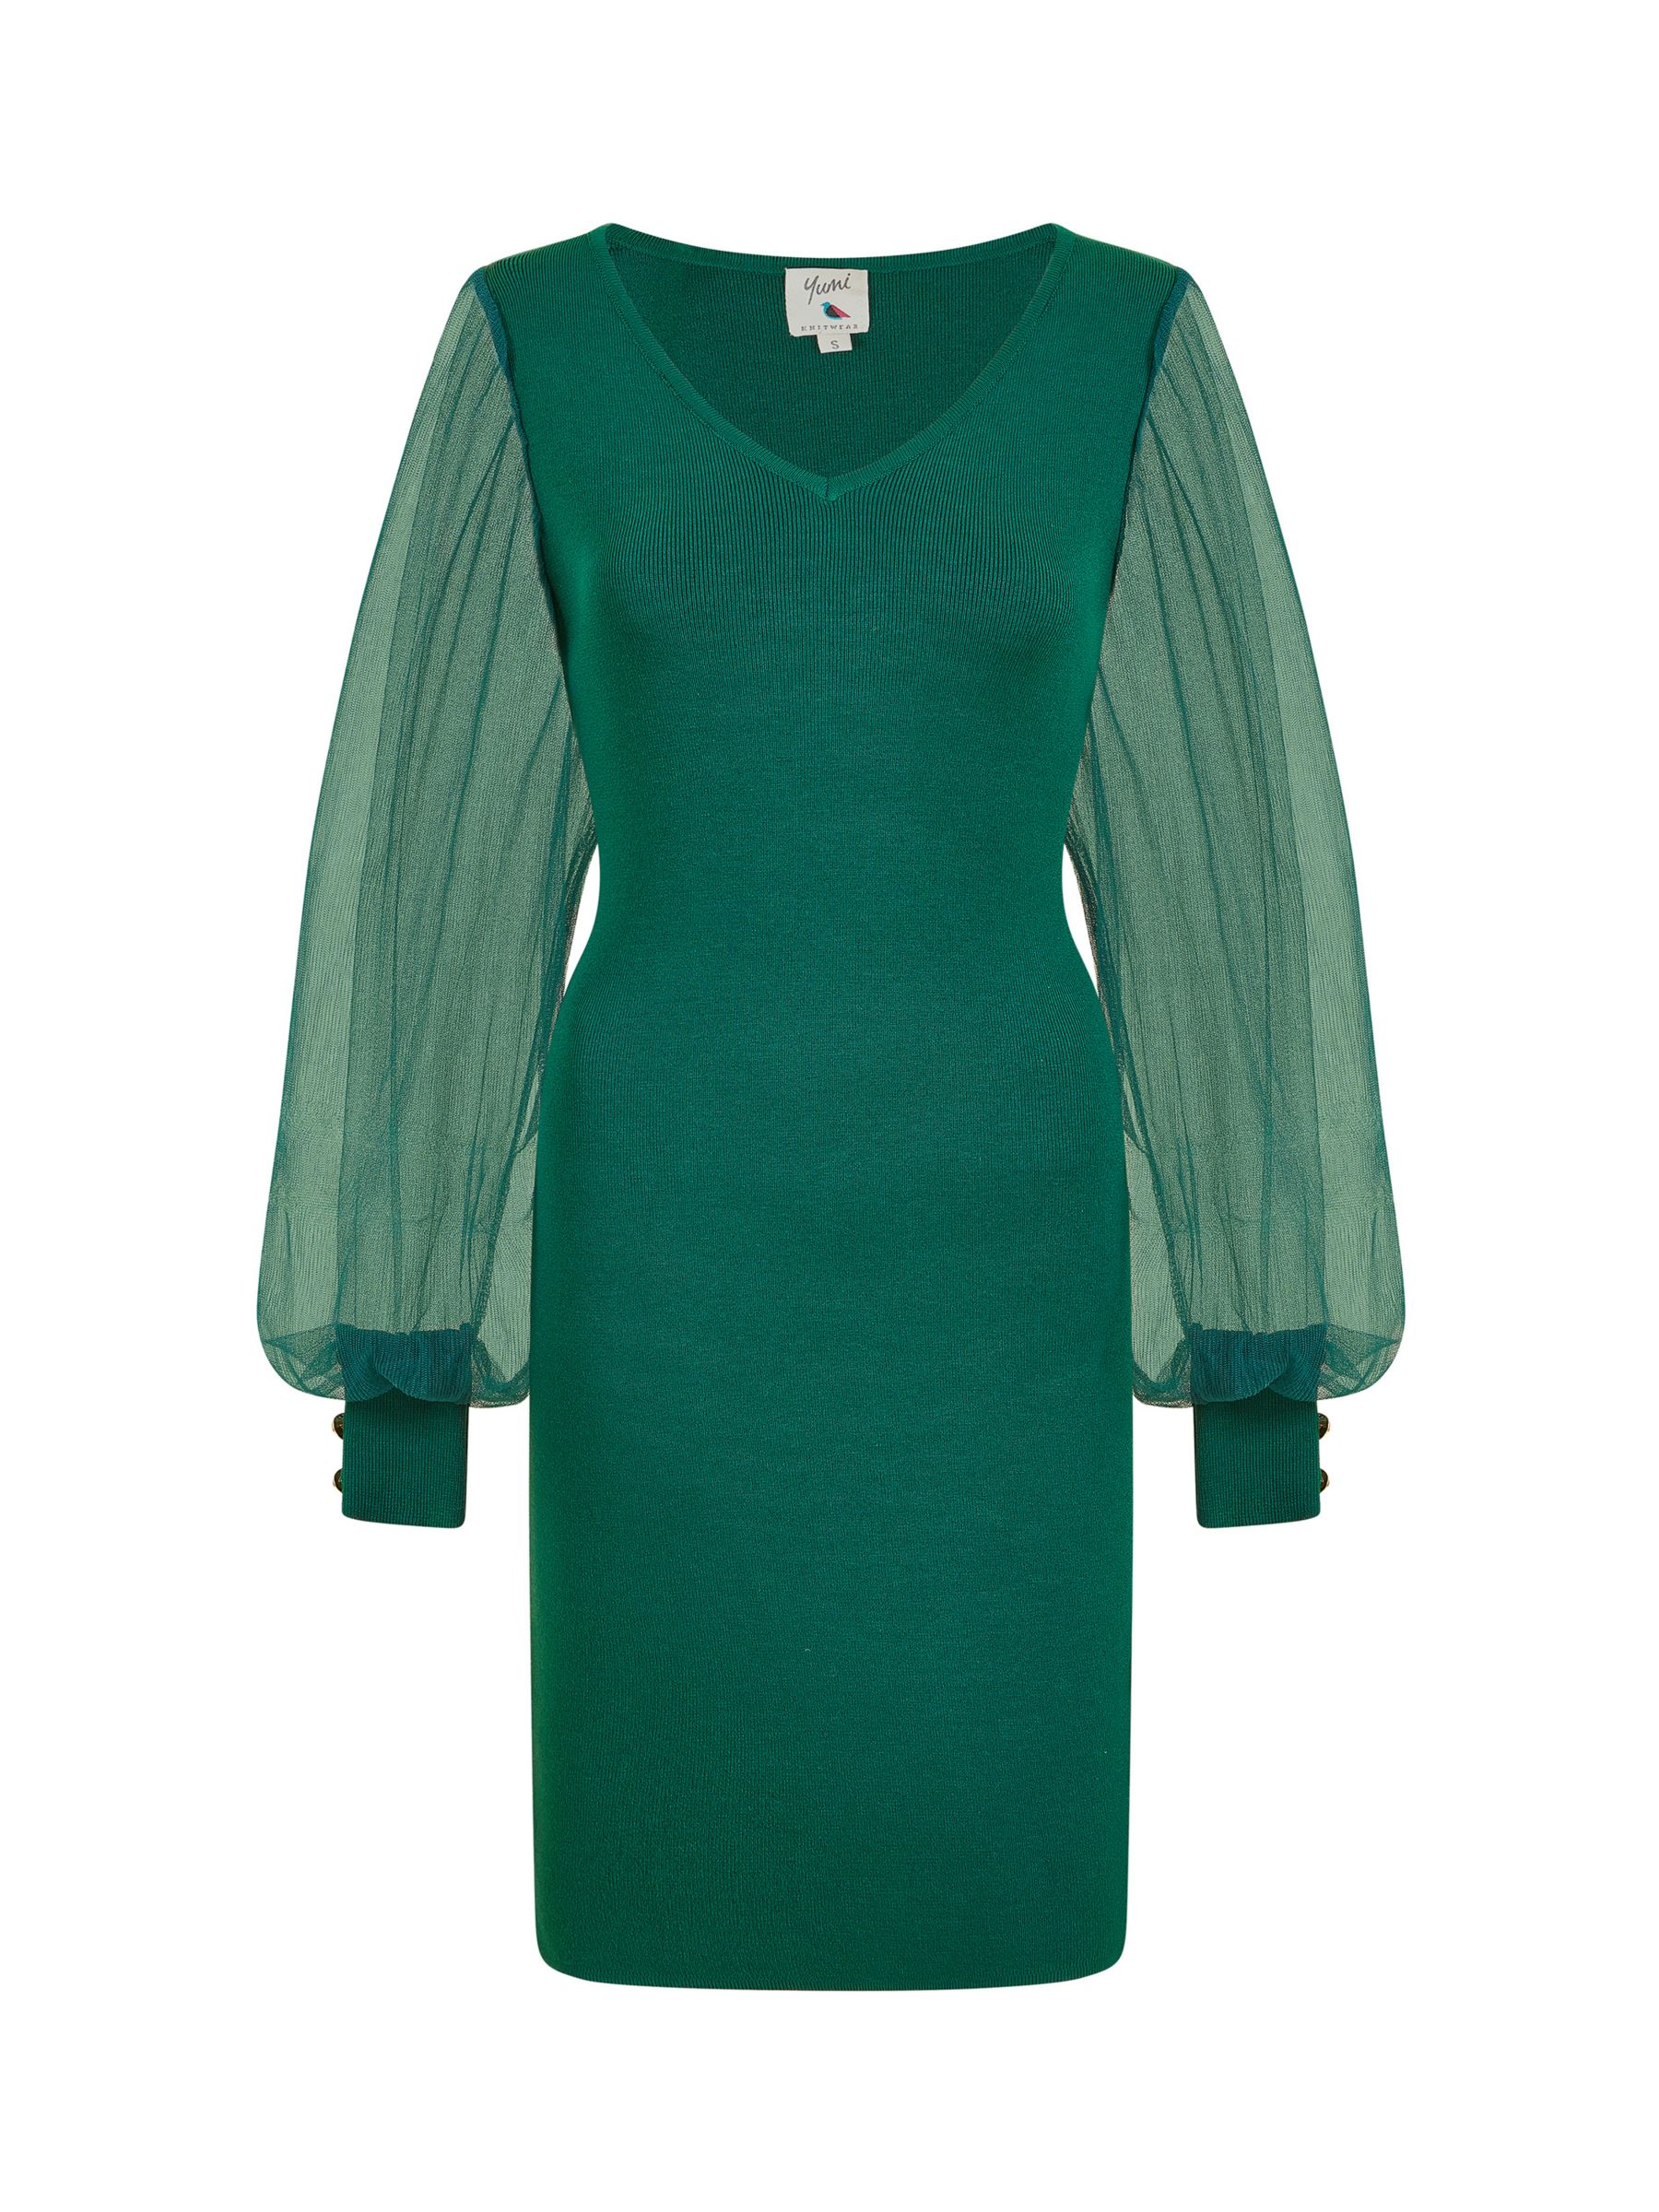 Buy Yumi Knitted Bodycon Chiffon Sleeve Dress, Green Online at johnlewis.com